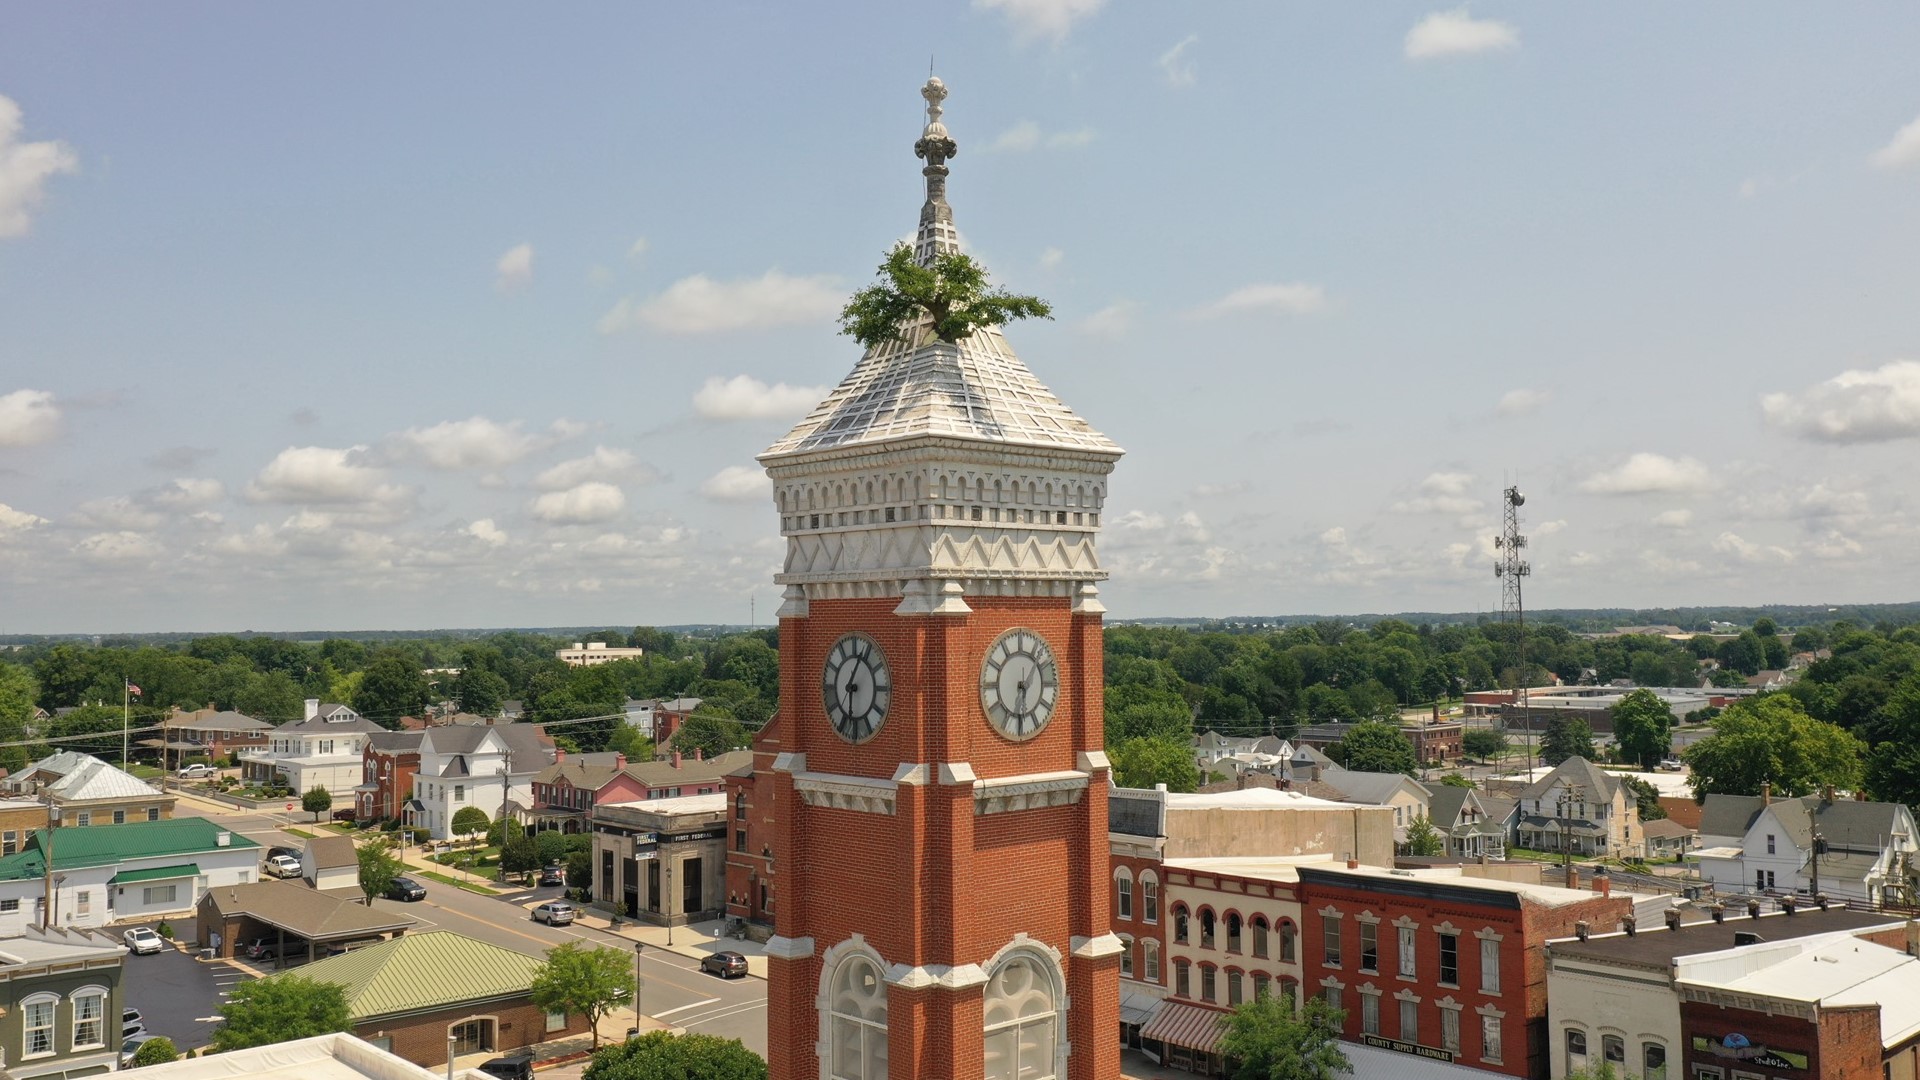 The city of Greensburg is offering remote workers $5,000 to move there and make it home.